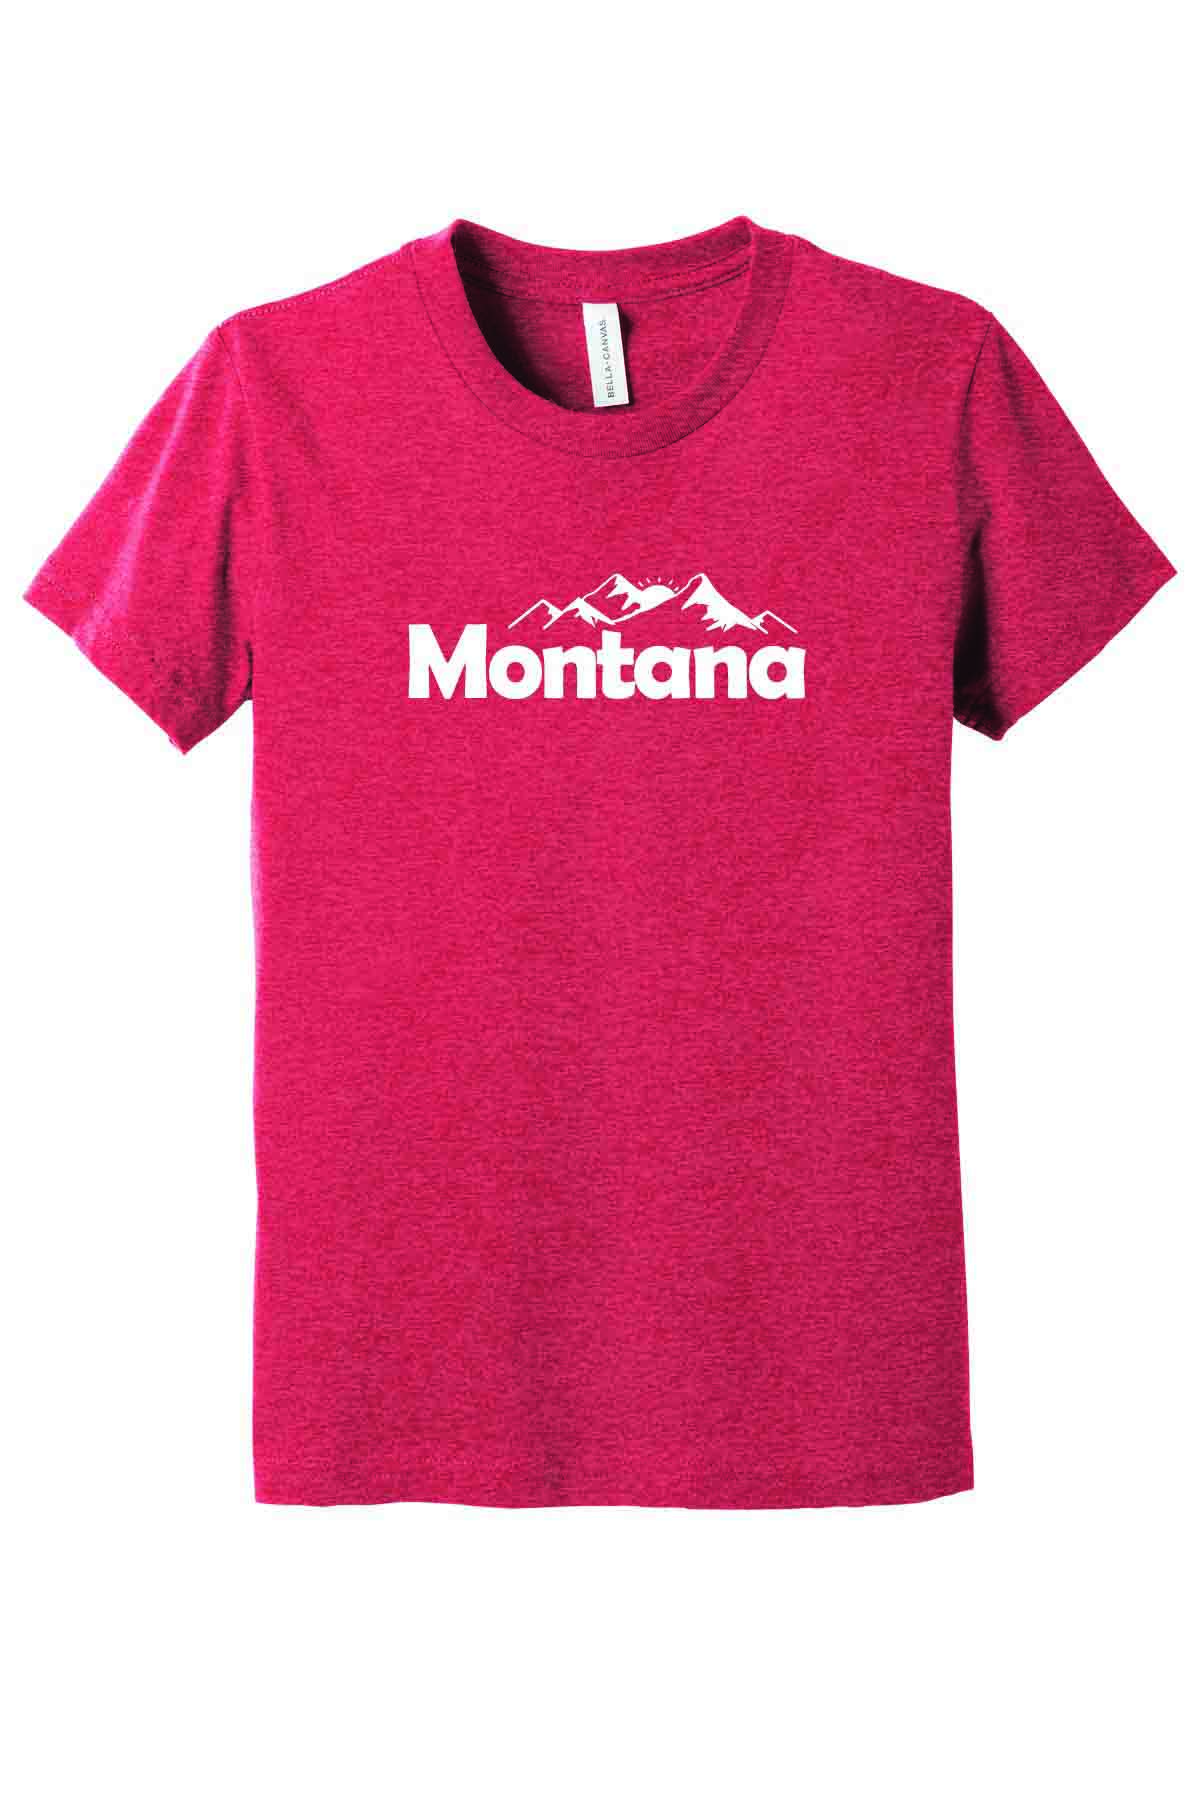 Featured image for “Tourist Tee YOUTH Montana (Multiple Colors)”